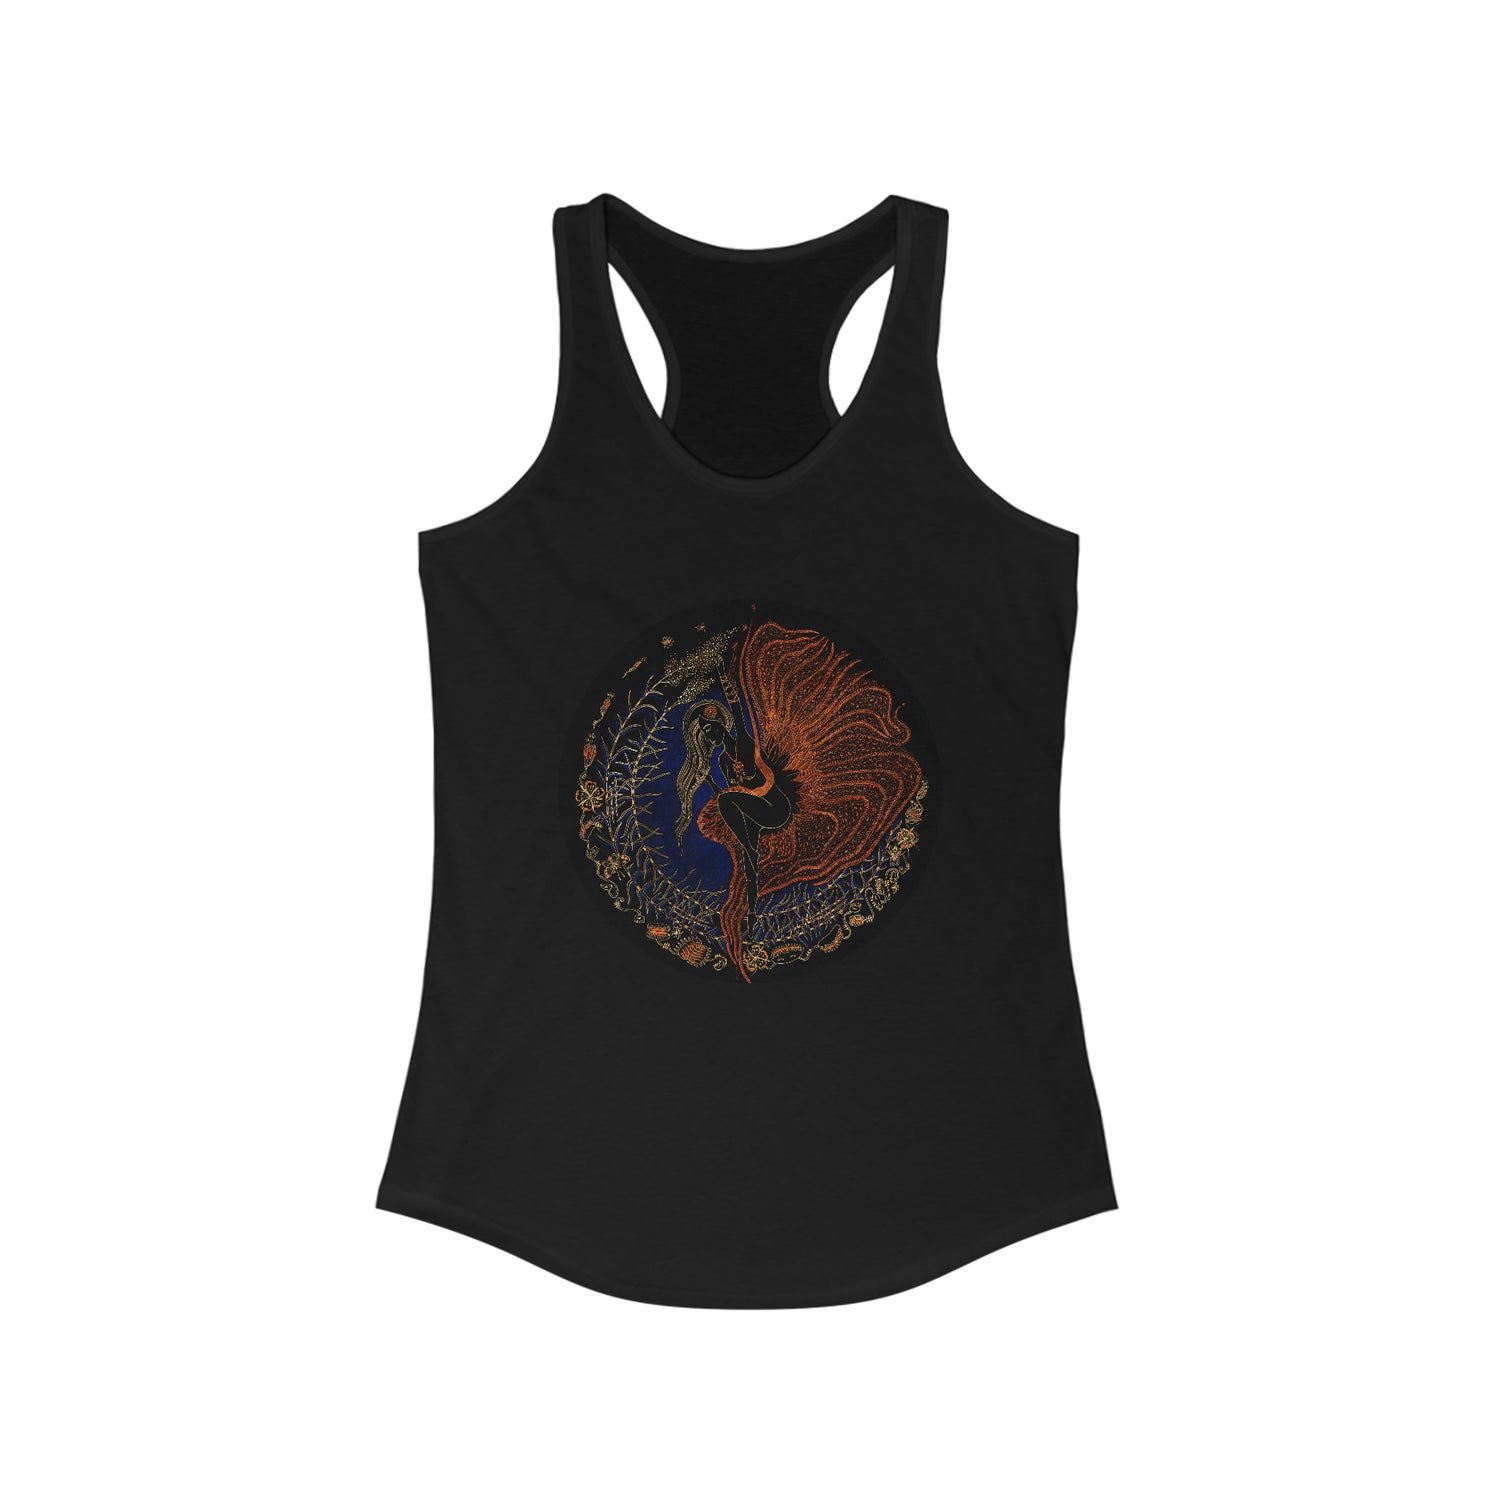 Chinese Zodiac Sign Tank Tops